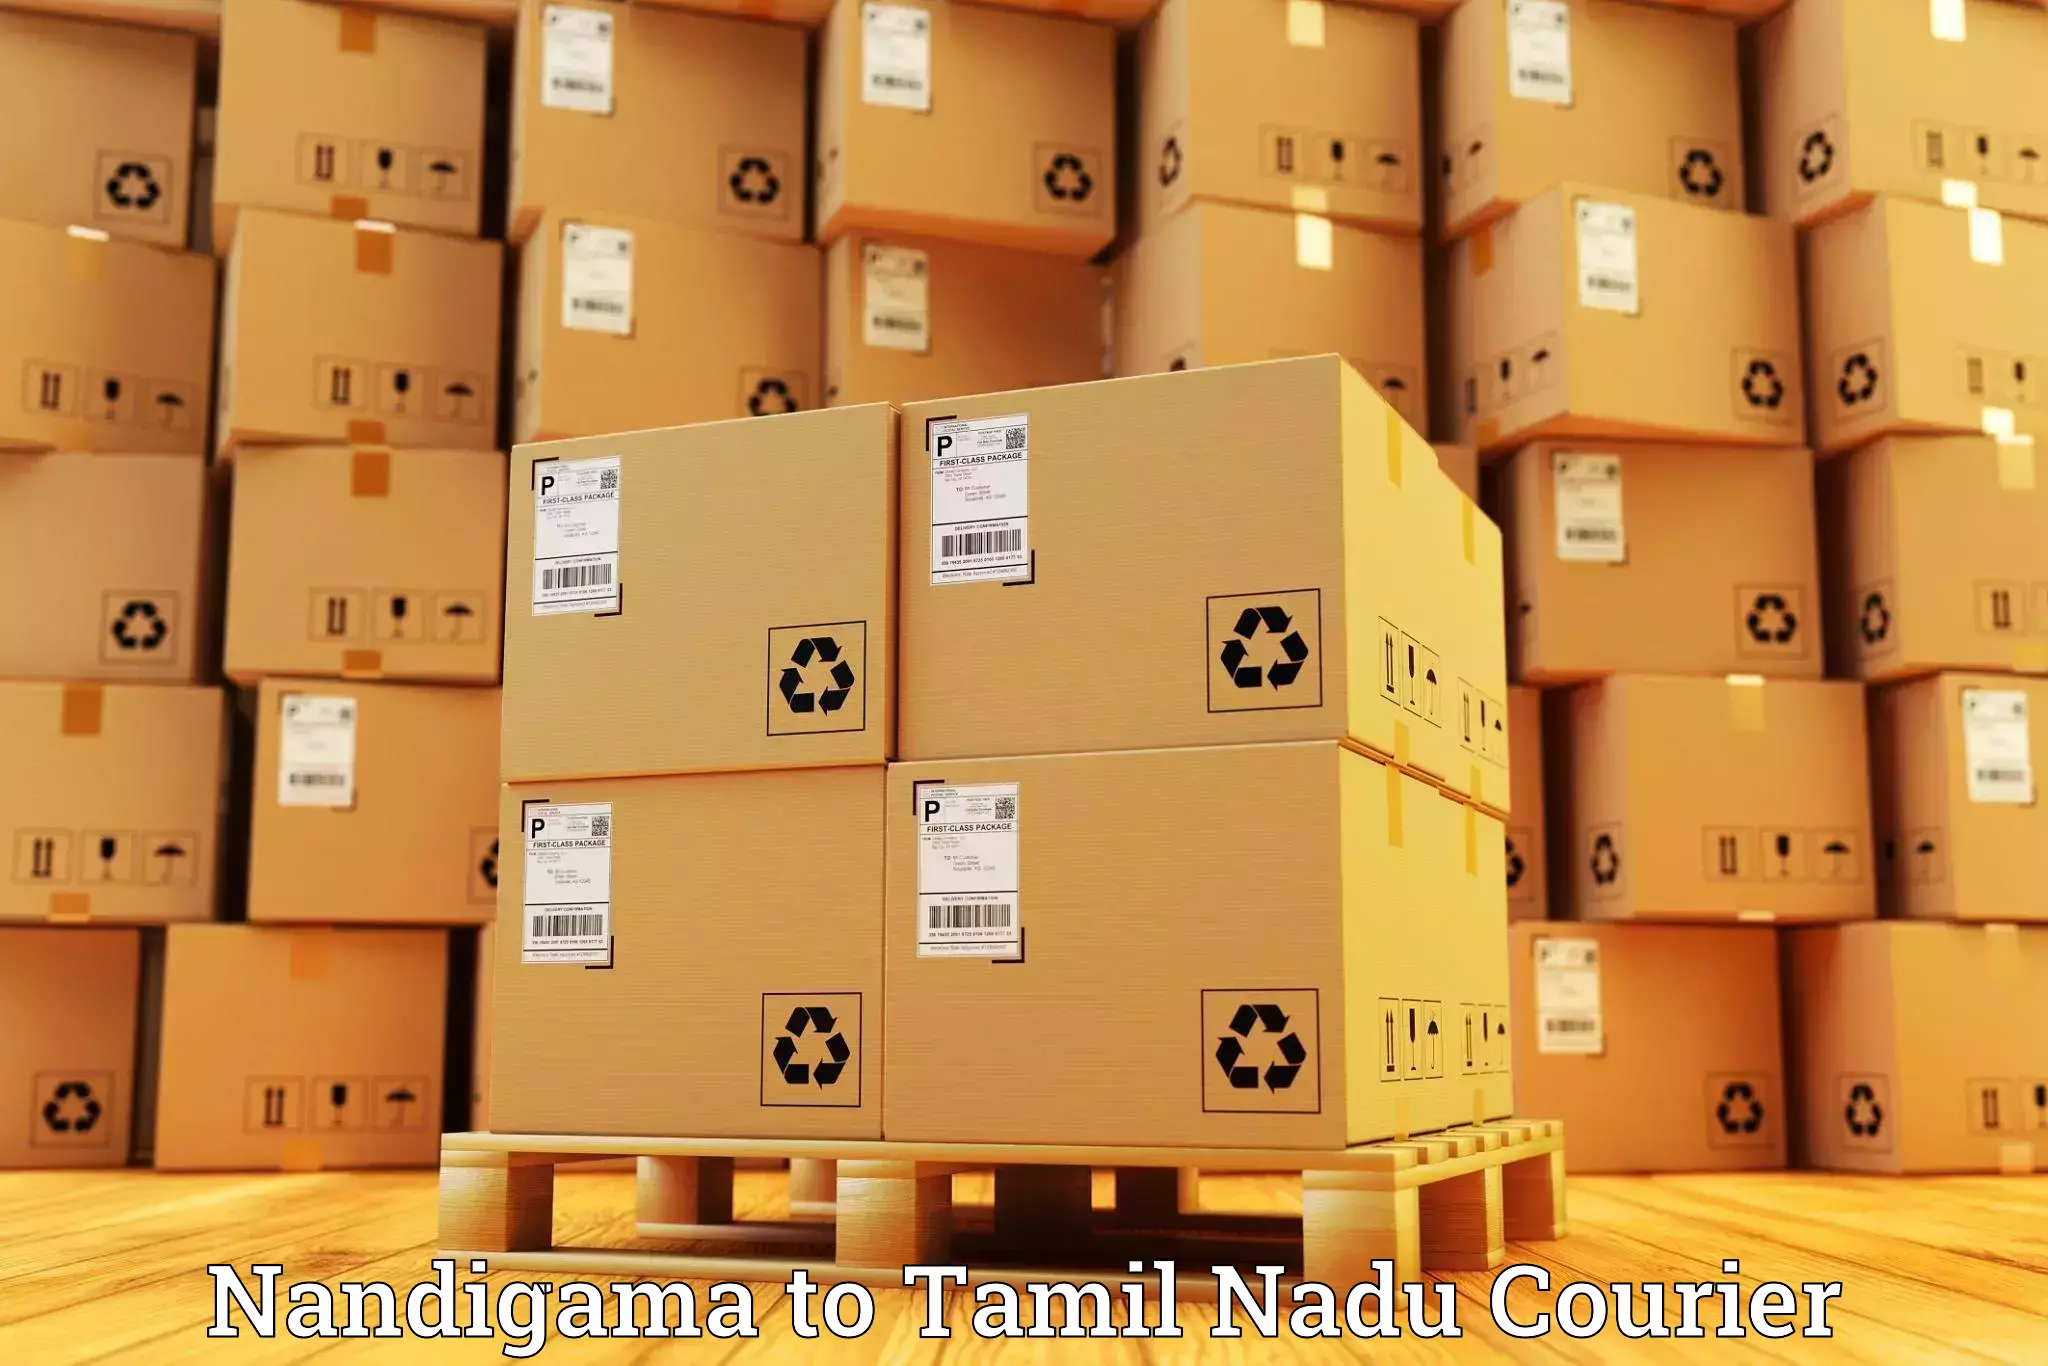 Reliable delivery network Nandigama to Tuticorin Port